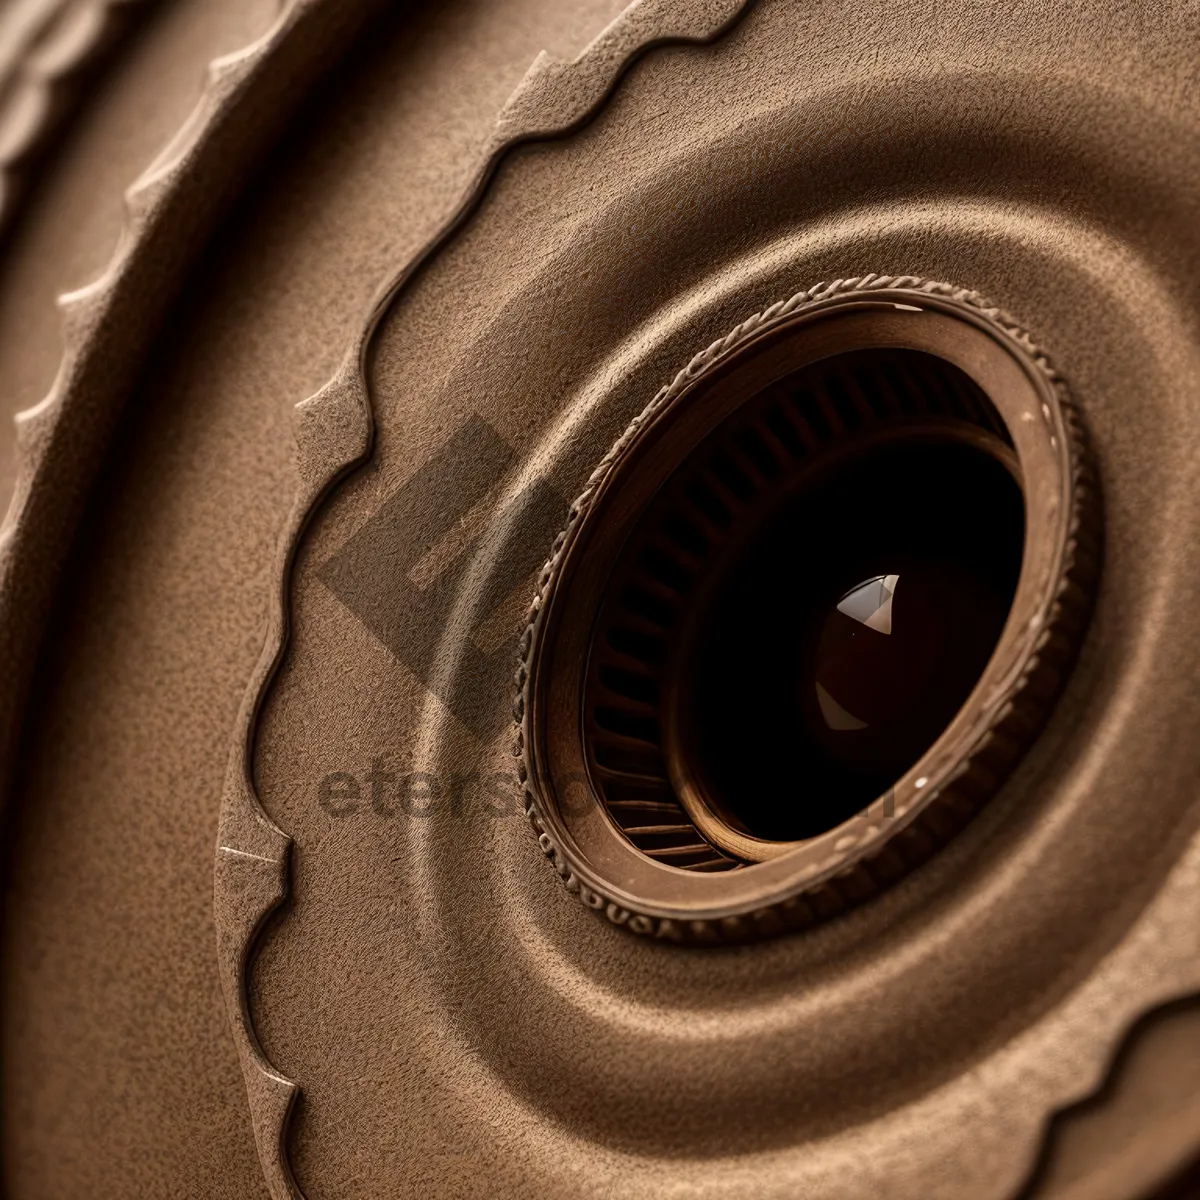 Picture of Mechanical Clutch Gear Coil Structure Close-Up